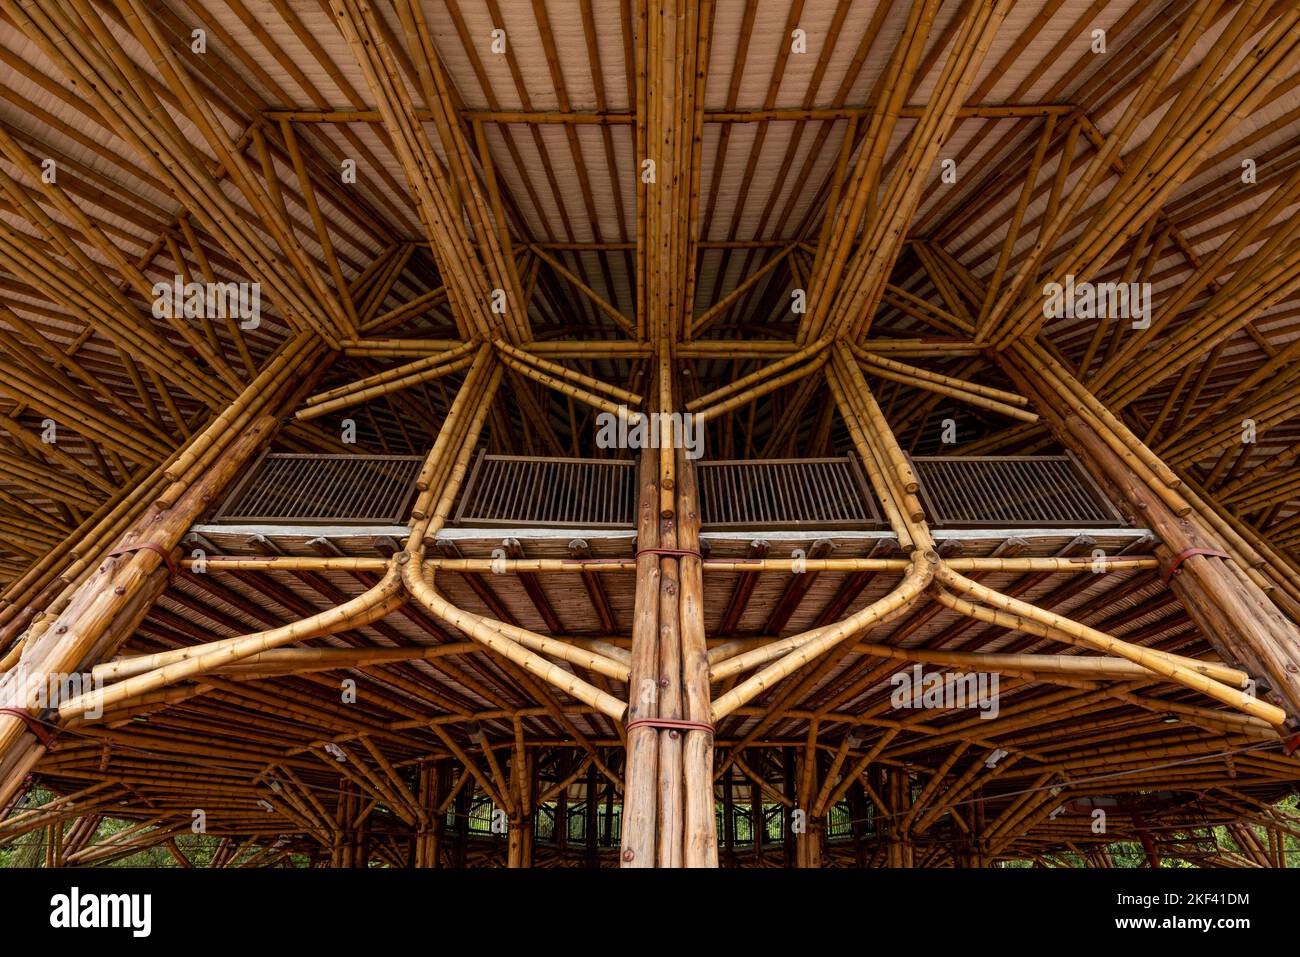 Detail of a bamboo construction in Colombia, Manizales, Caldas, Antioquia, South America Stock Photo